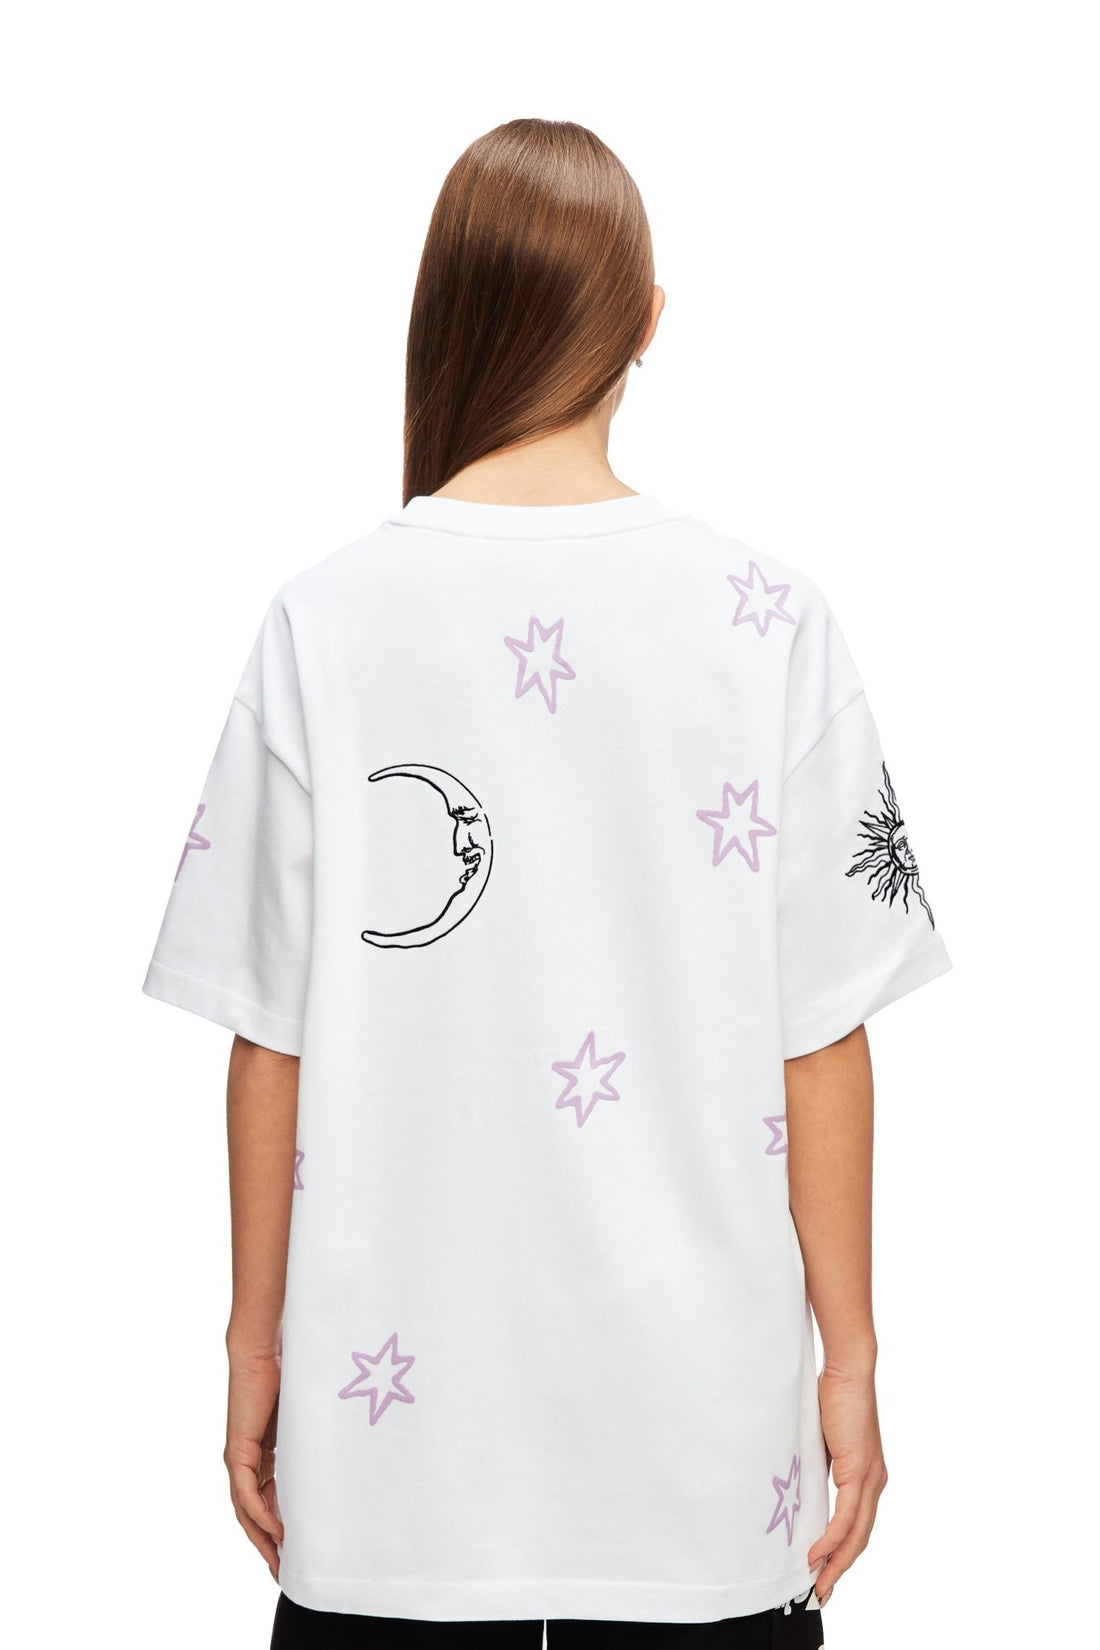 STAR MOON T-SHIRT Acupuncture